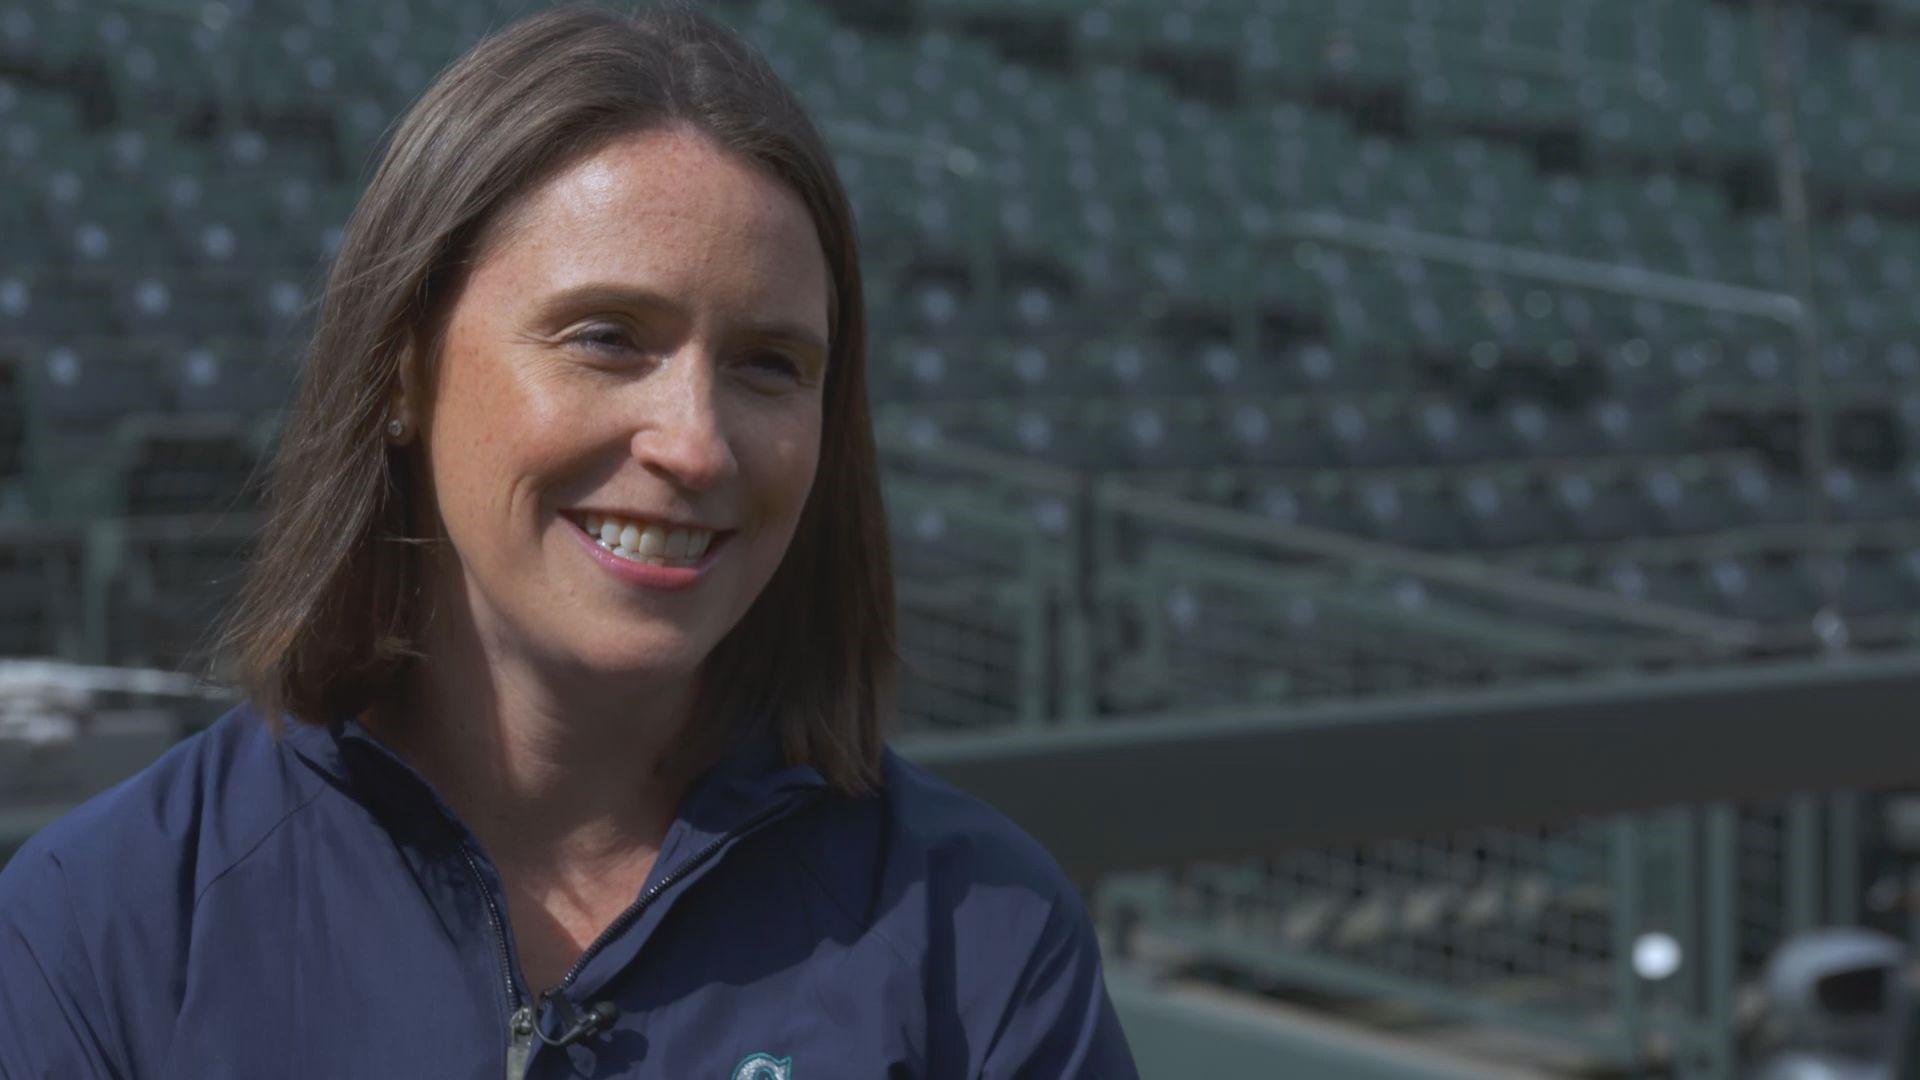 Mariners President Catie Griggs, who became the highest-ranking woman in Major League Baseball last year, talks shattering norms and the future of the M's.